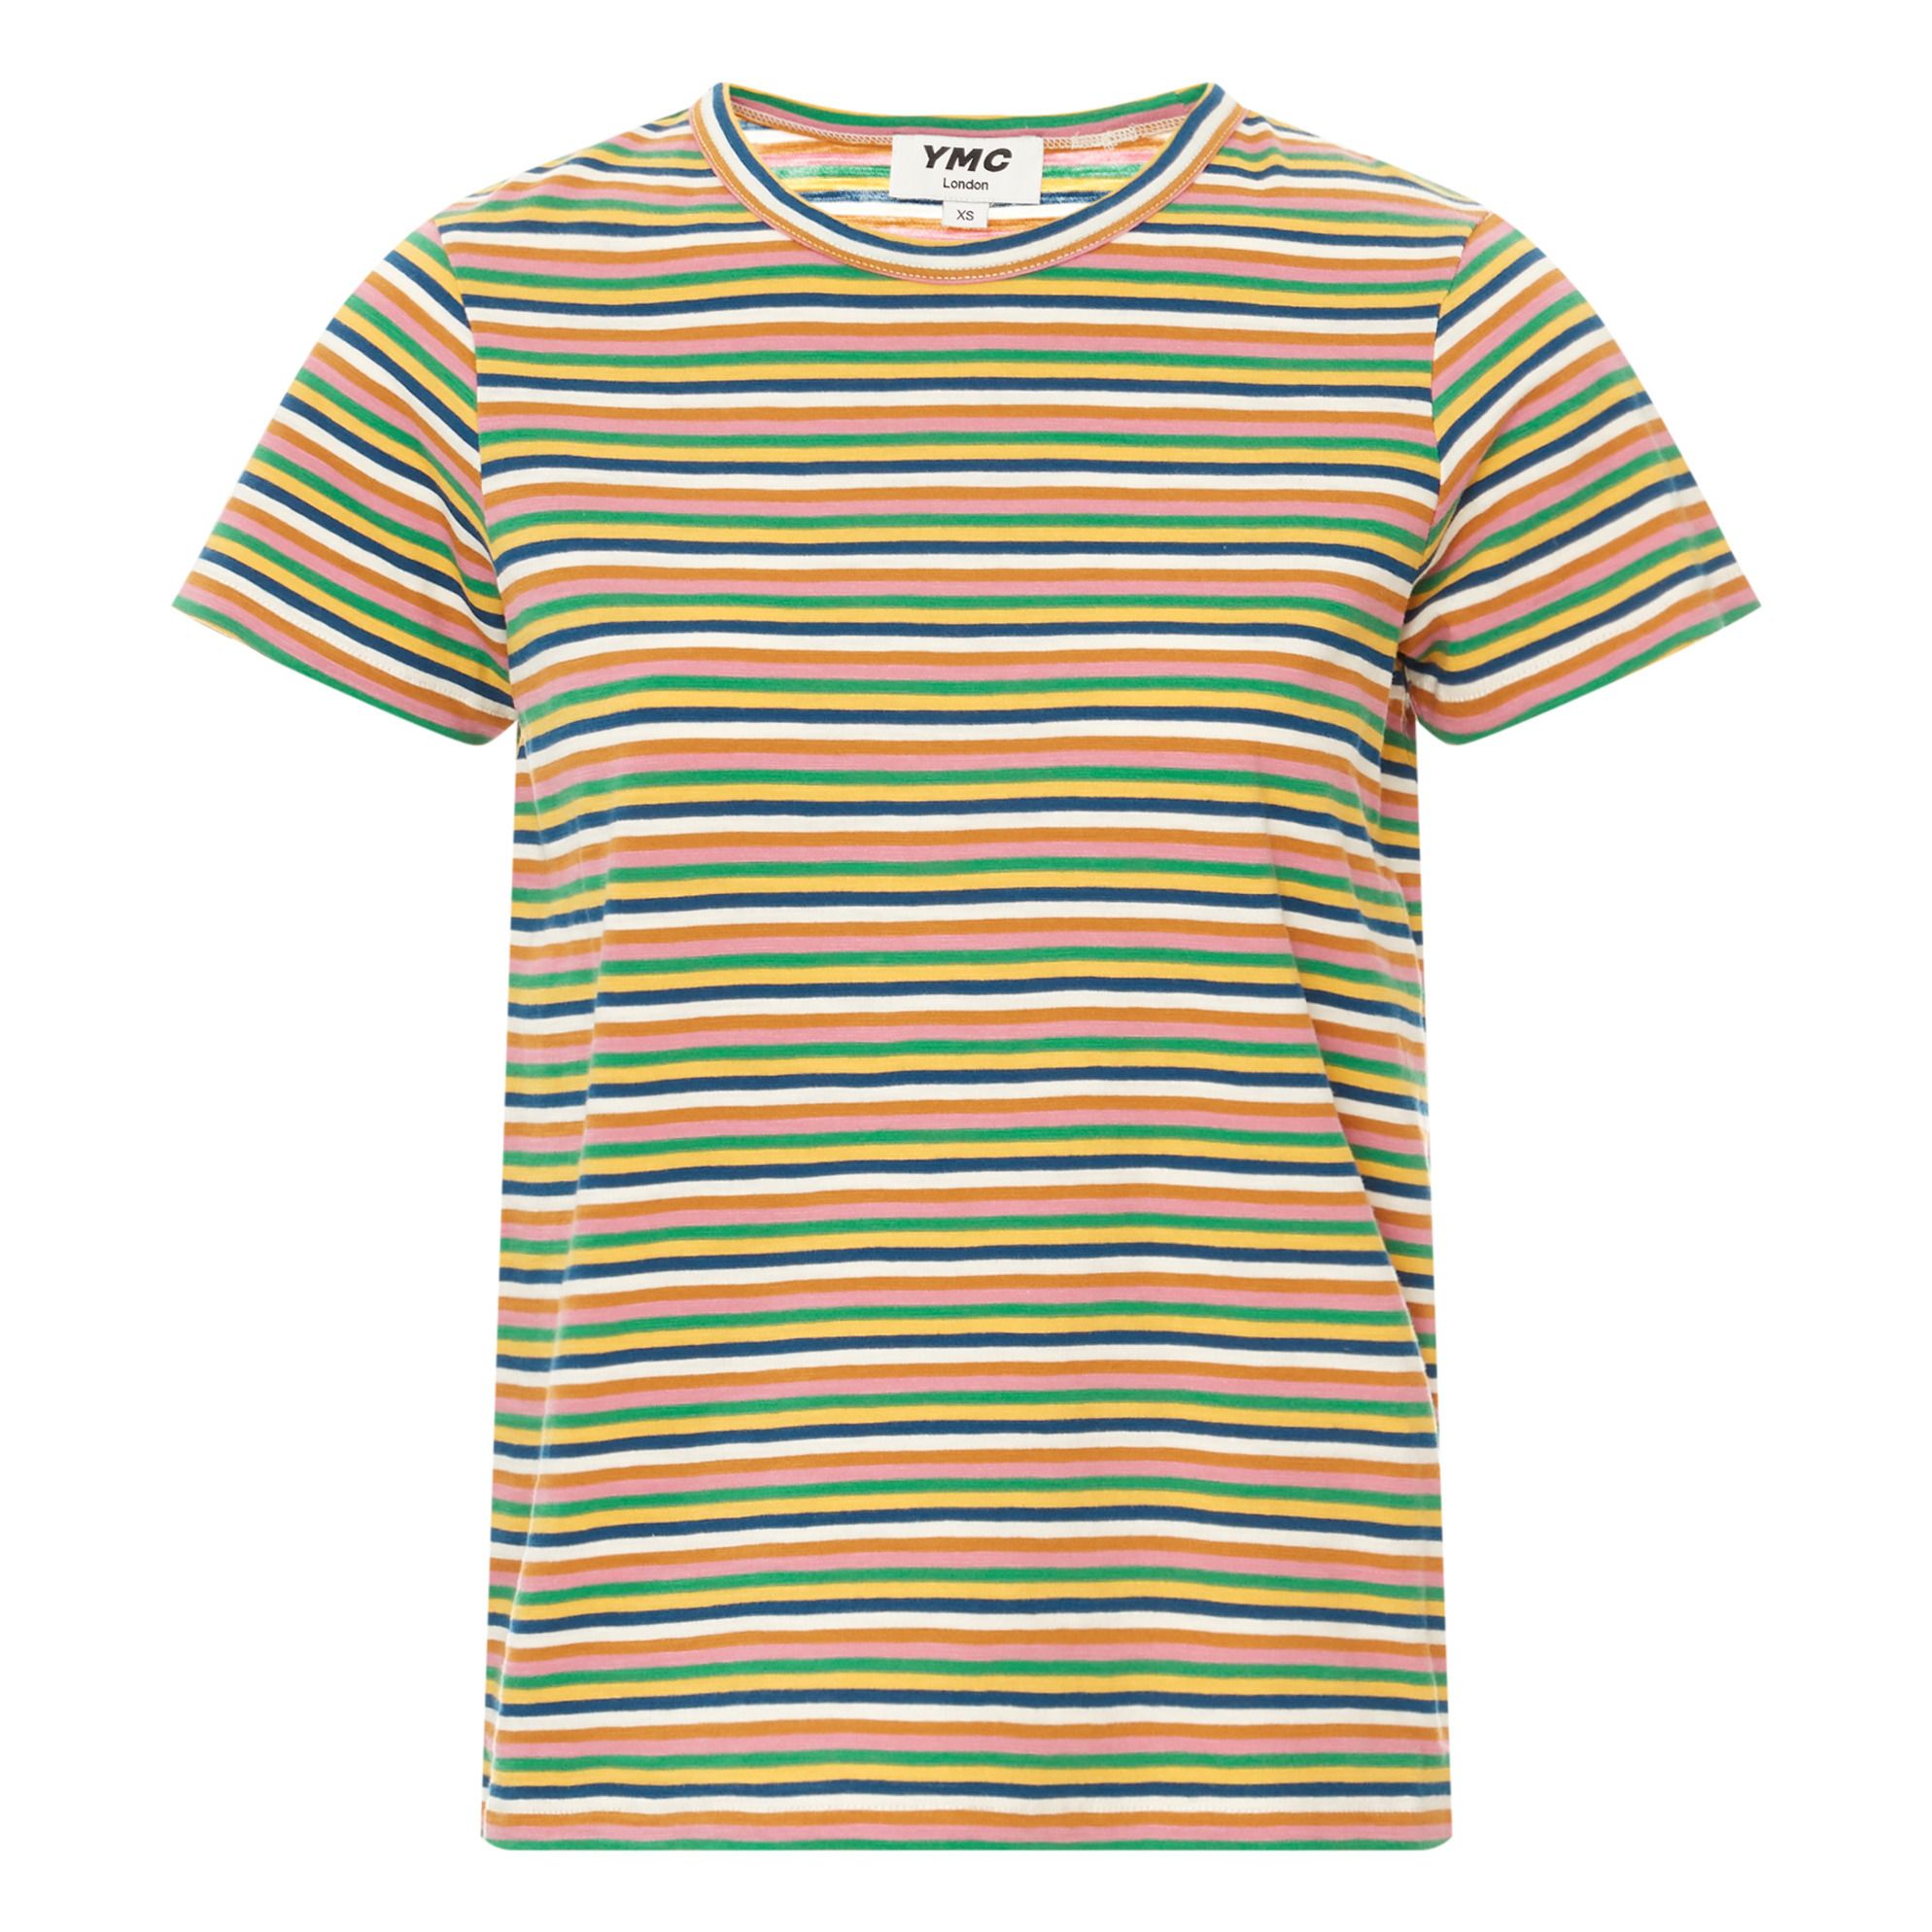 YMC - T-shirt Rayures Day - Femme - Multicolore